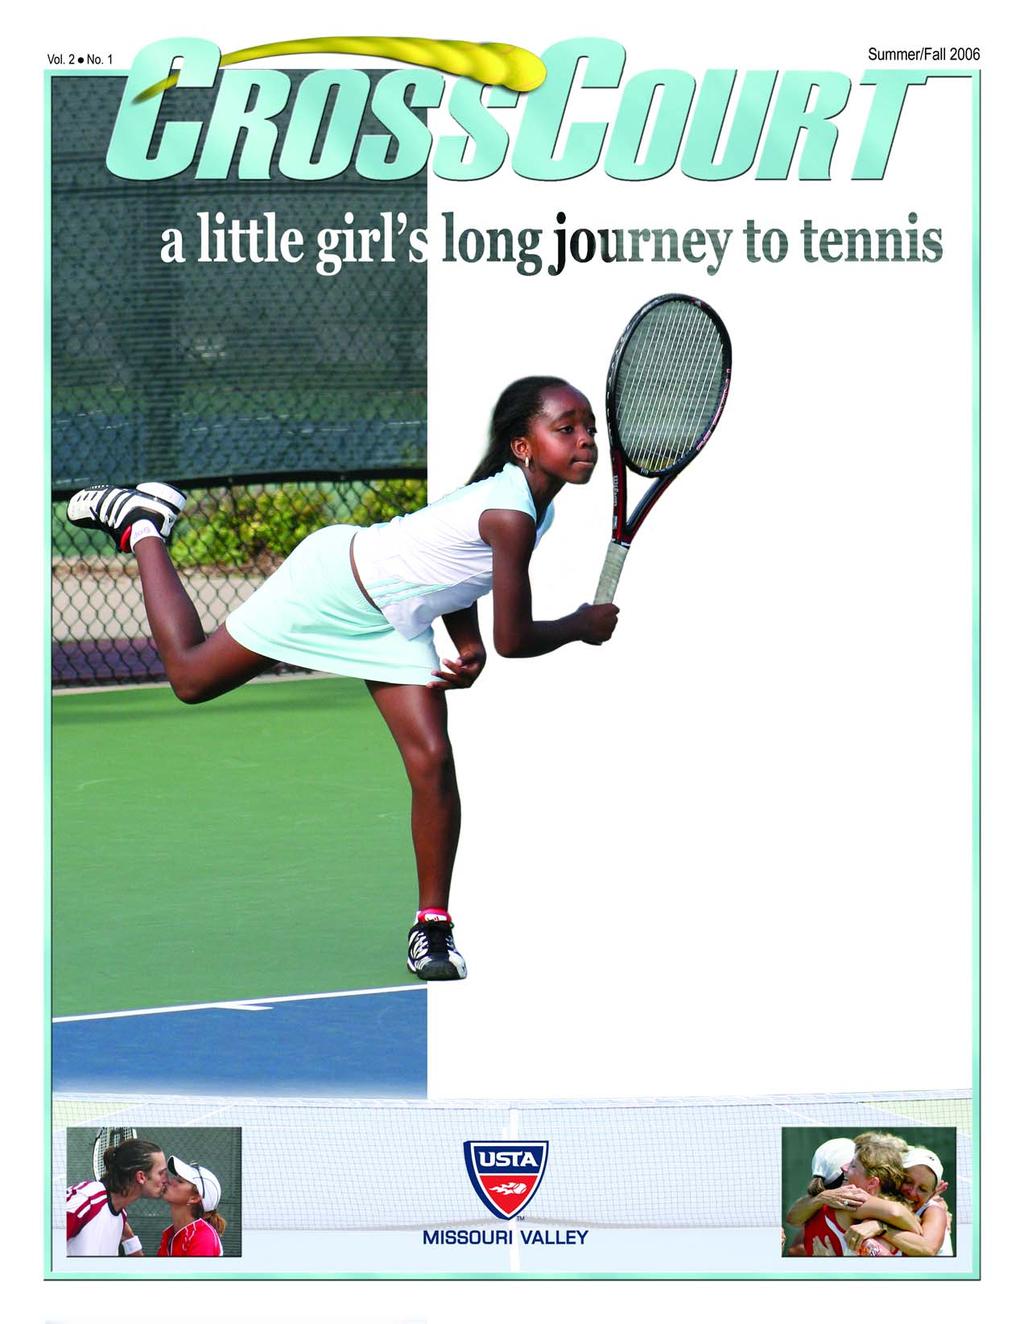 From Cameroon to KC, Liz Jeukeng finds safe haven to pursue a love for tennis W hen Liz Jeukeng and her father, Nassaire Nkamgouo, flew together to Miami in April of this year to attend a select USTA